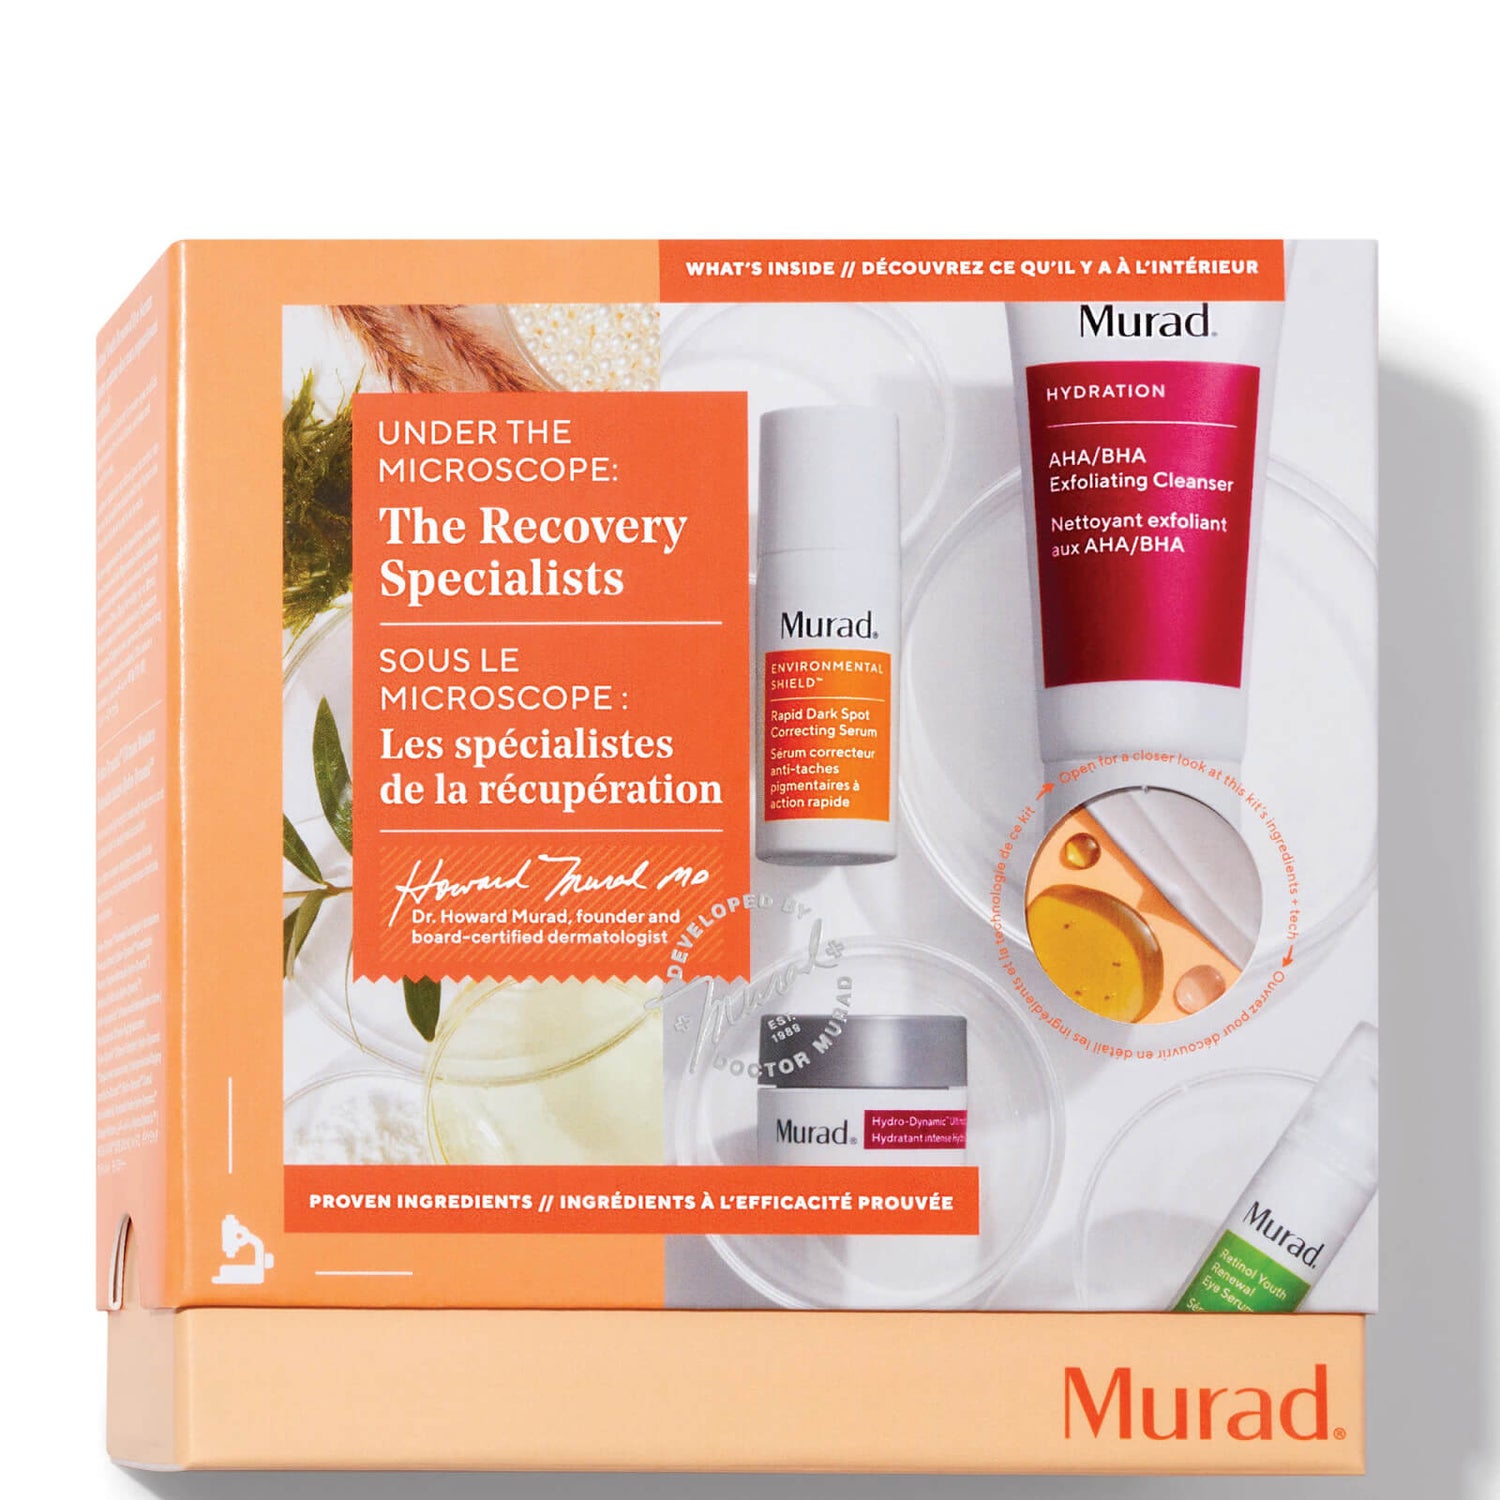 Murad Under the Microscope: The Recovery Specialists